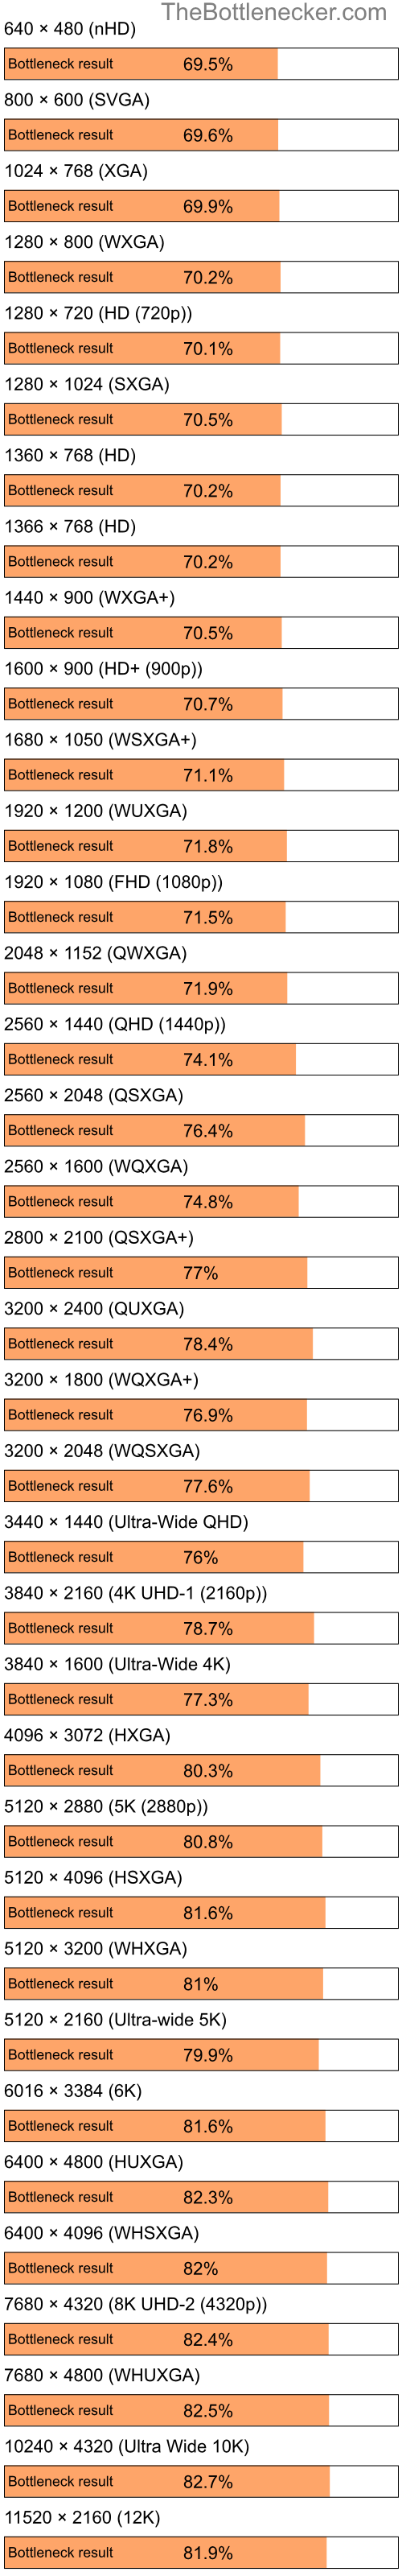 Bottleneck results by resolution for Intel Atom Z520 and AMD Radeon X1550 in7 Days to Die